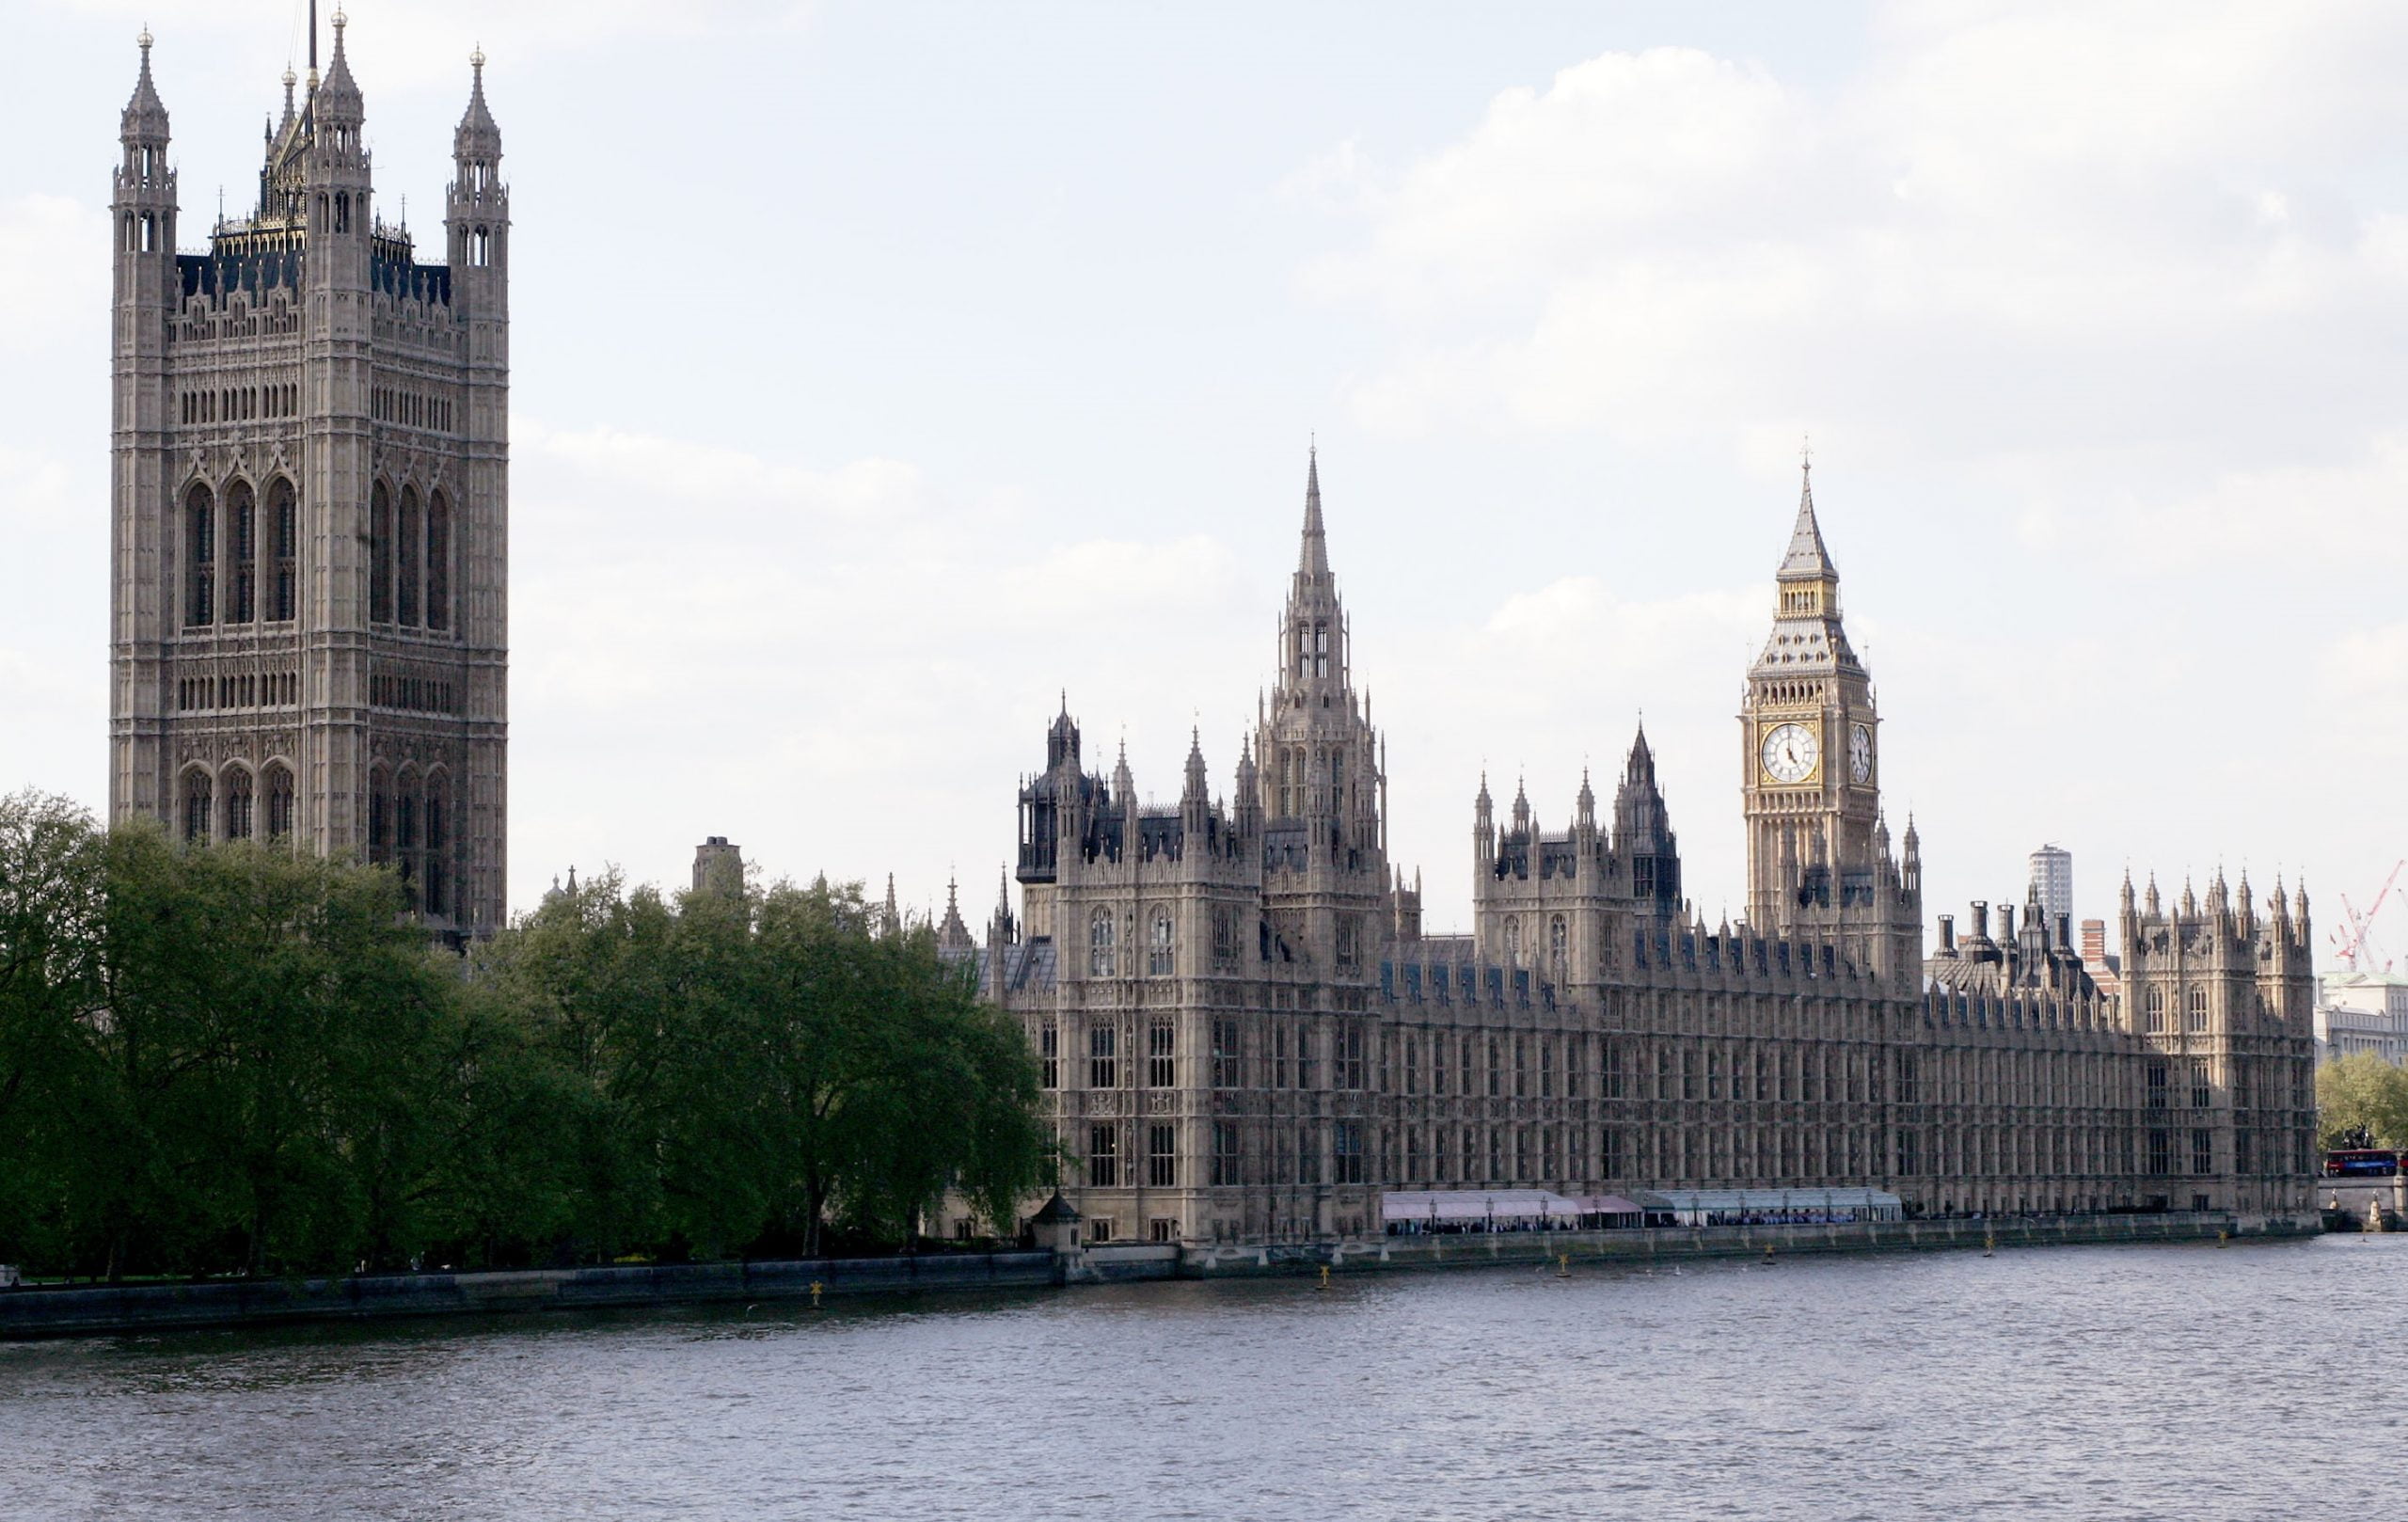 Image of the River Thames and the Parliament